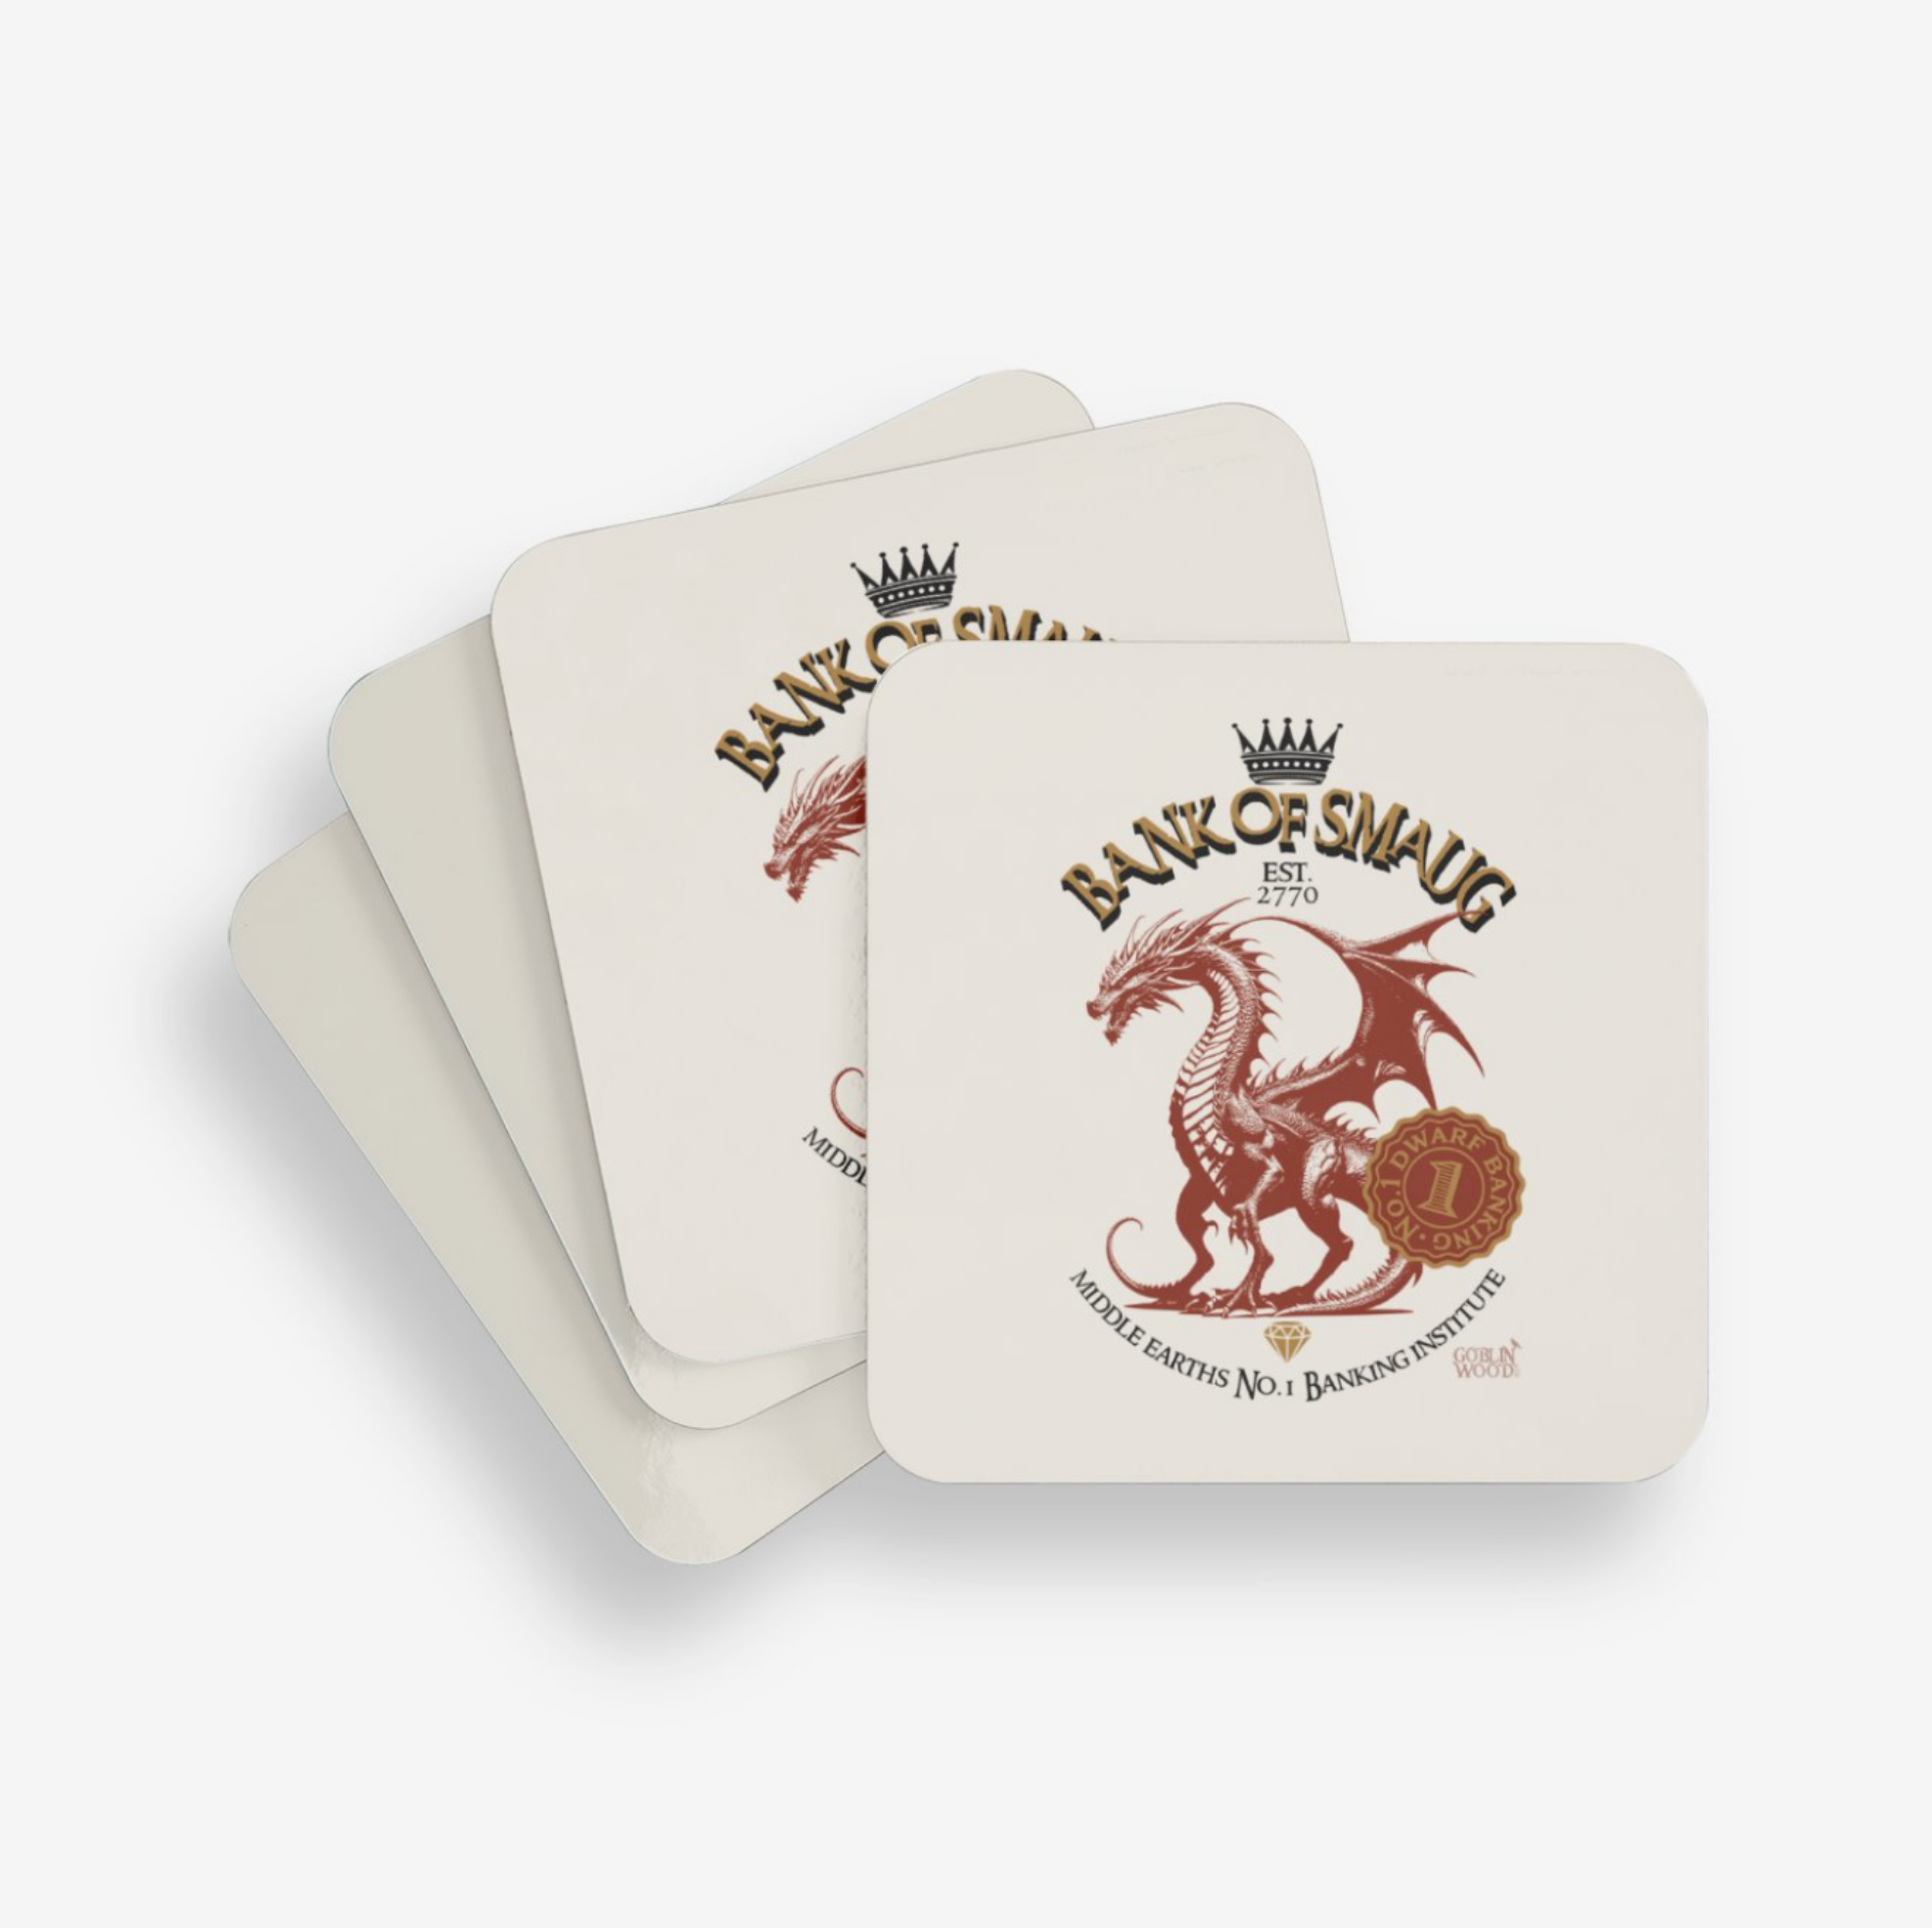 Bank of Smaug Coaster - The Hobbit inspired